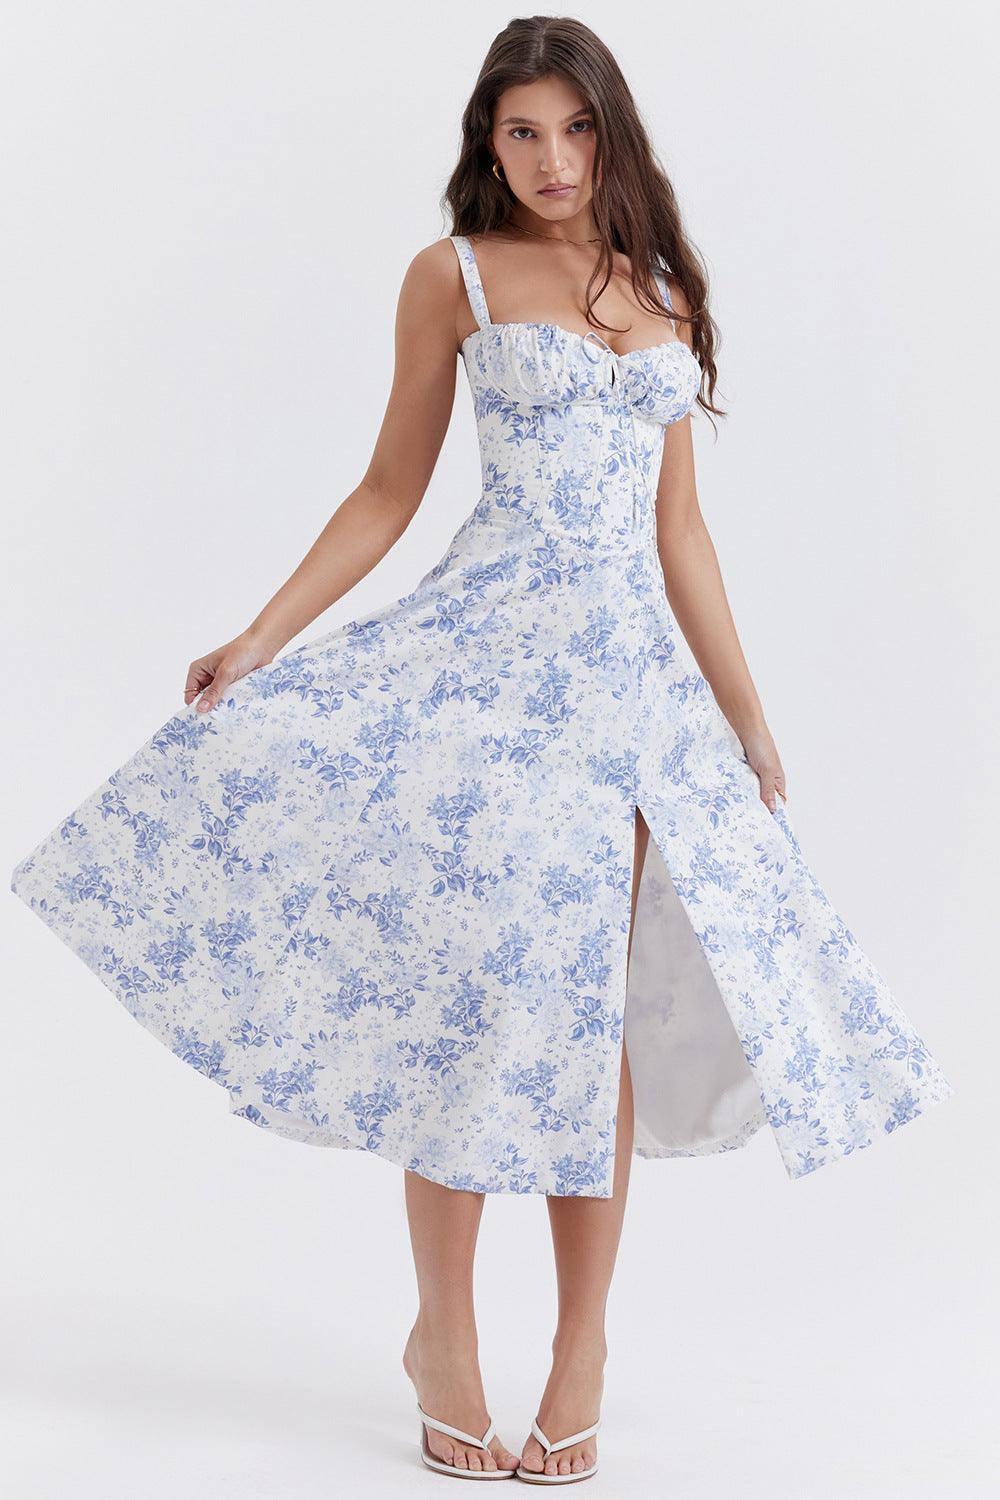 New Women's Floral Print Dress With Straps-White Blue-9